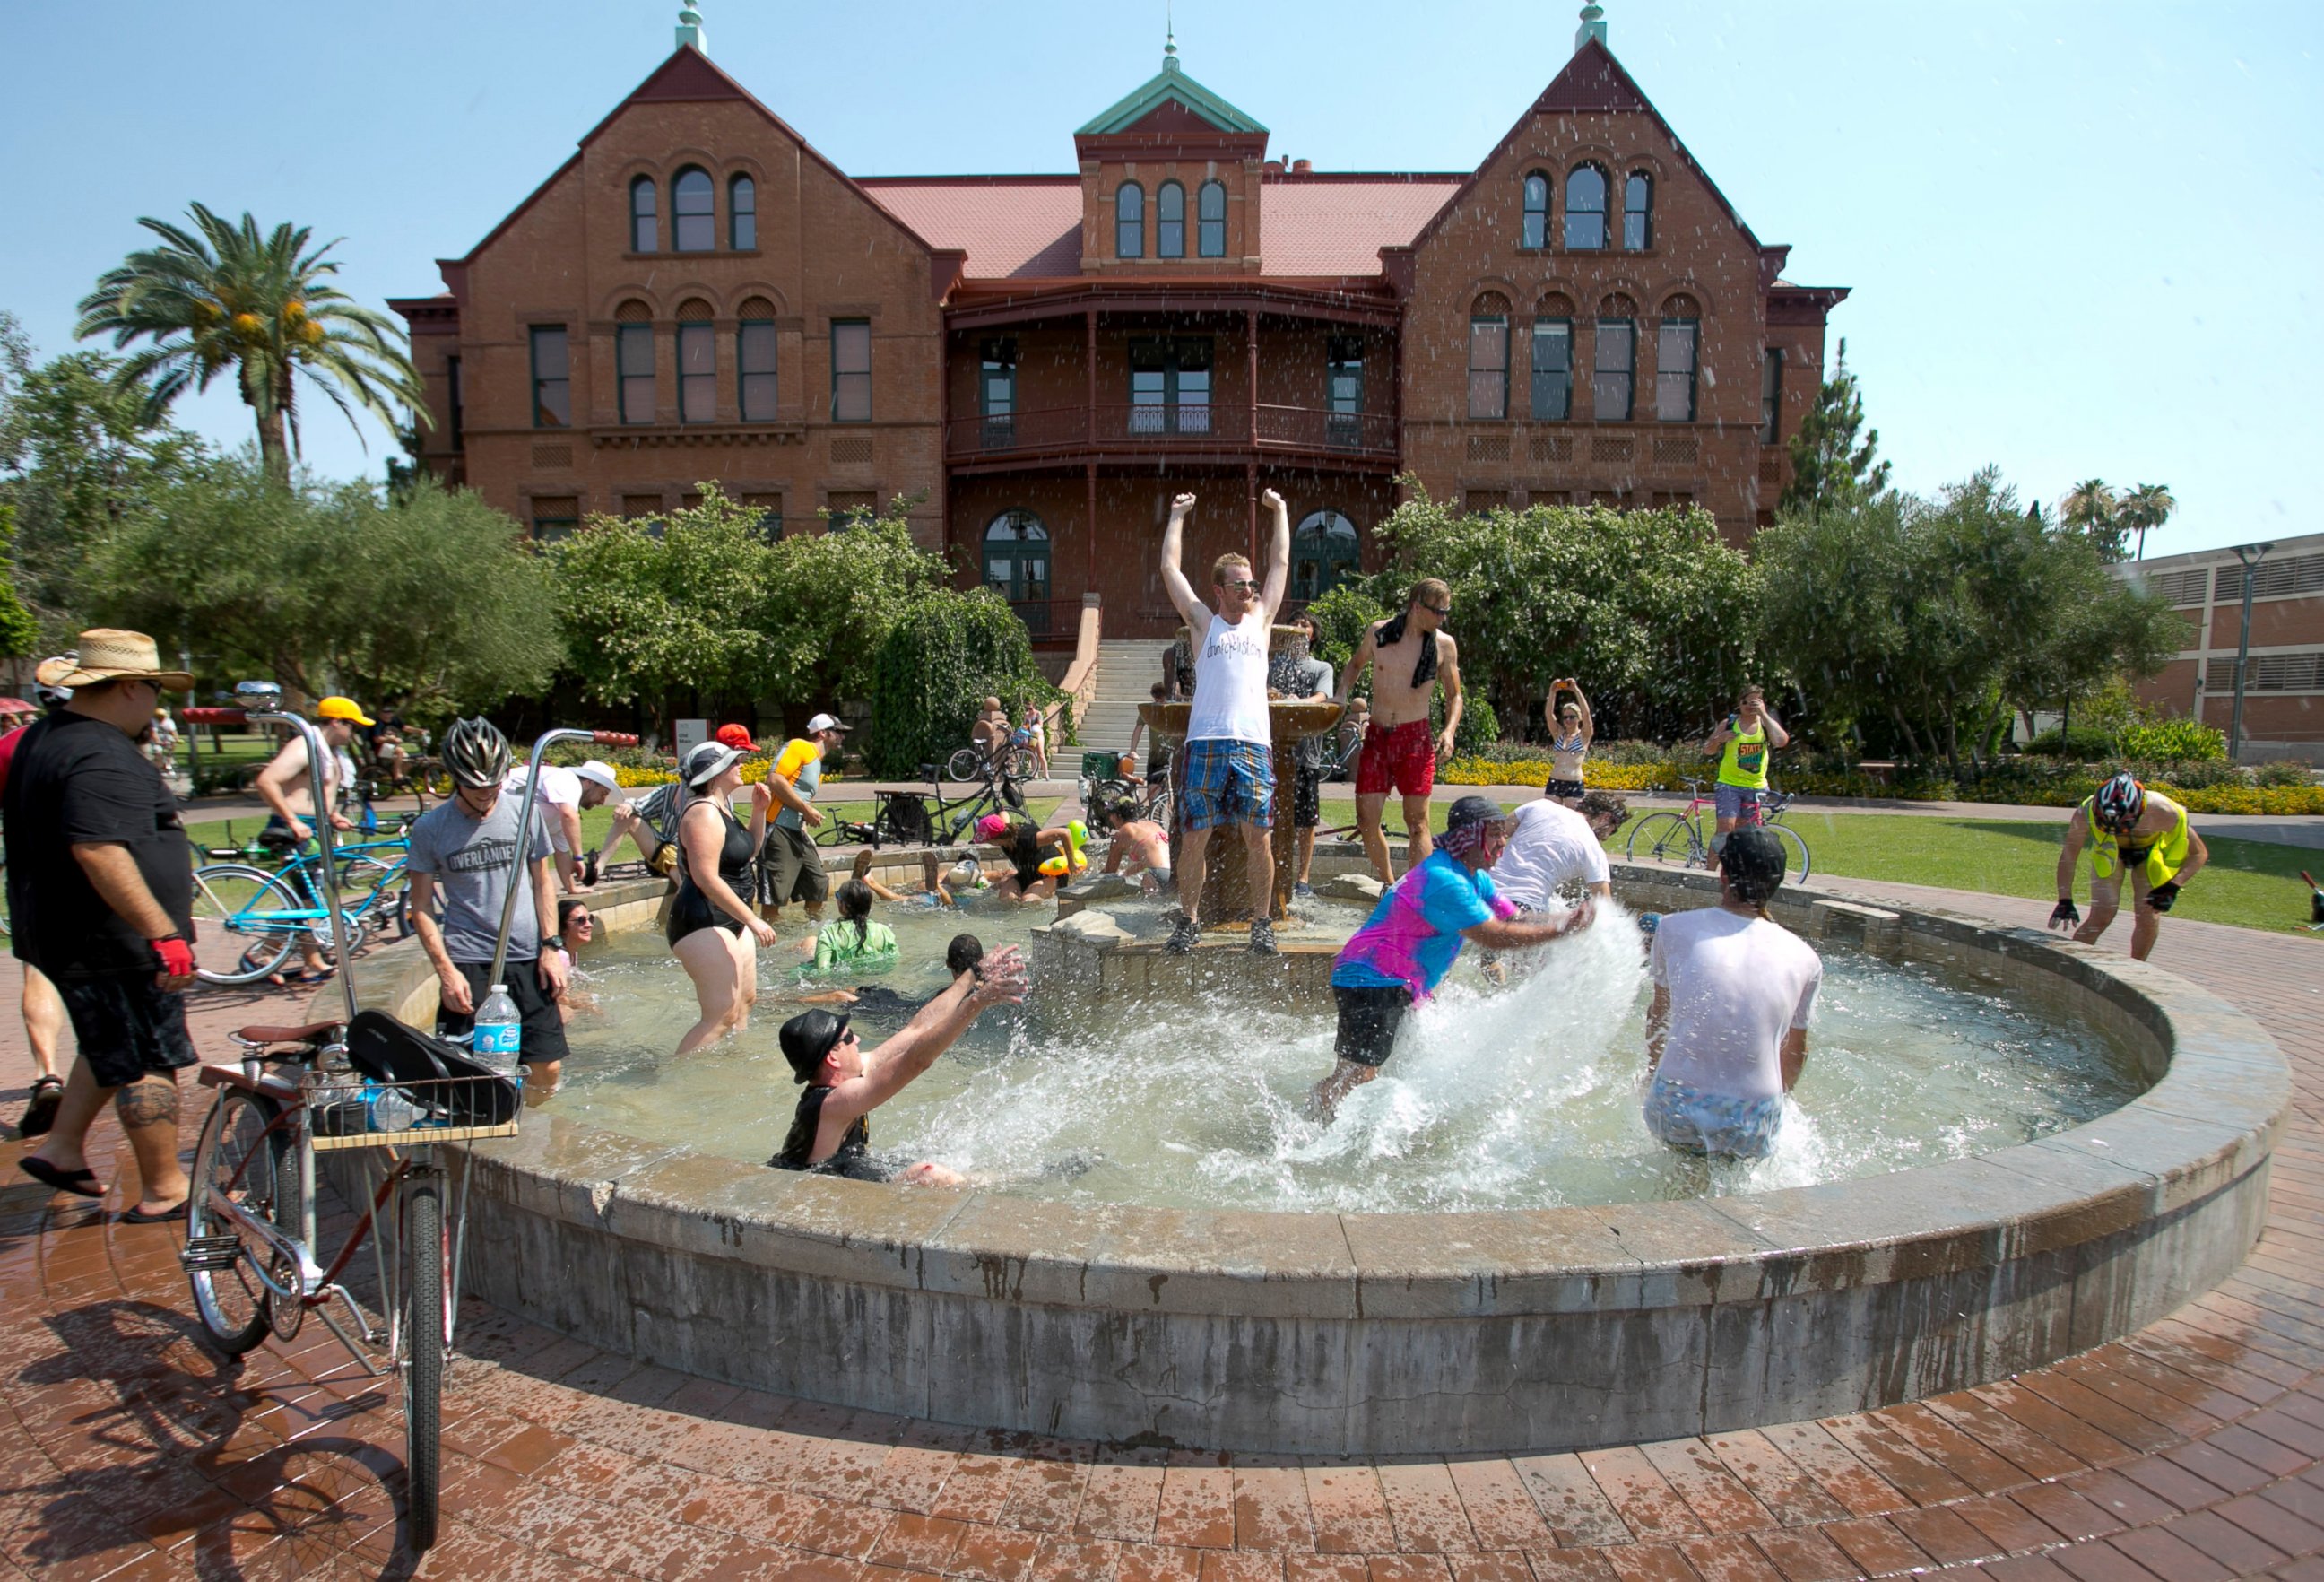 PHOTO: People cool off in the fountain in front of Old Main on Arizona State University campus in Tempe, Ariz. during the Tempe Bicycle Action Group swimsuit ride, June 29, 2013. 